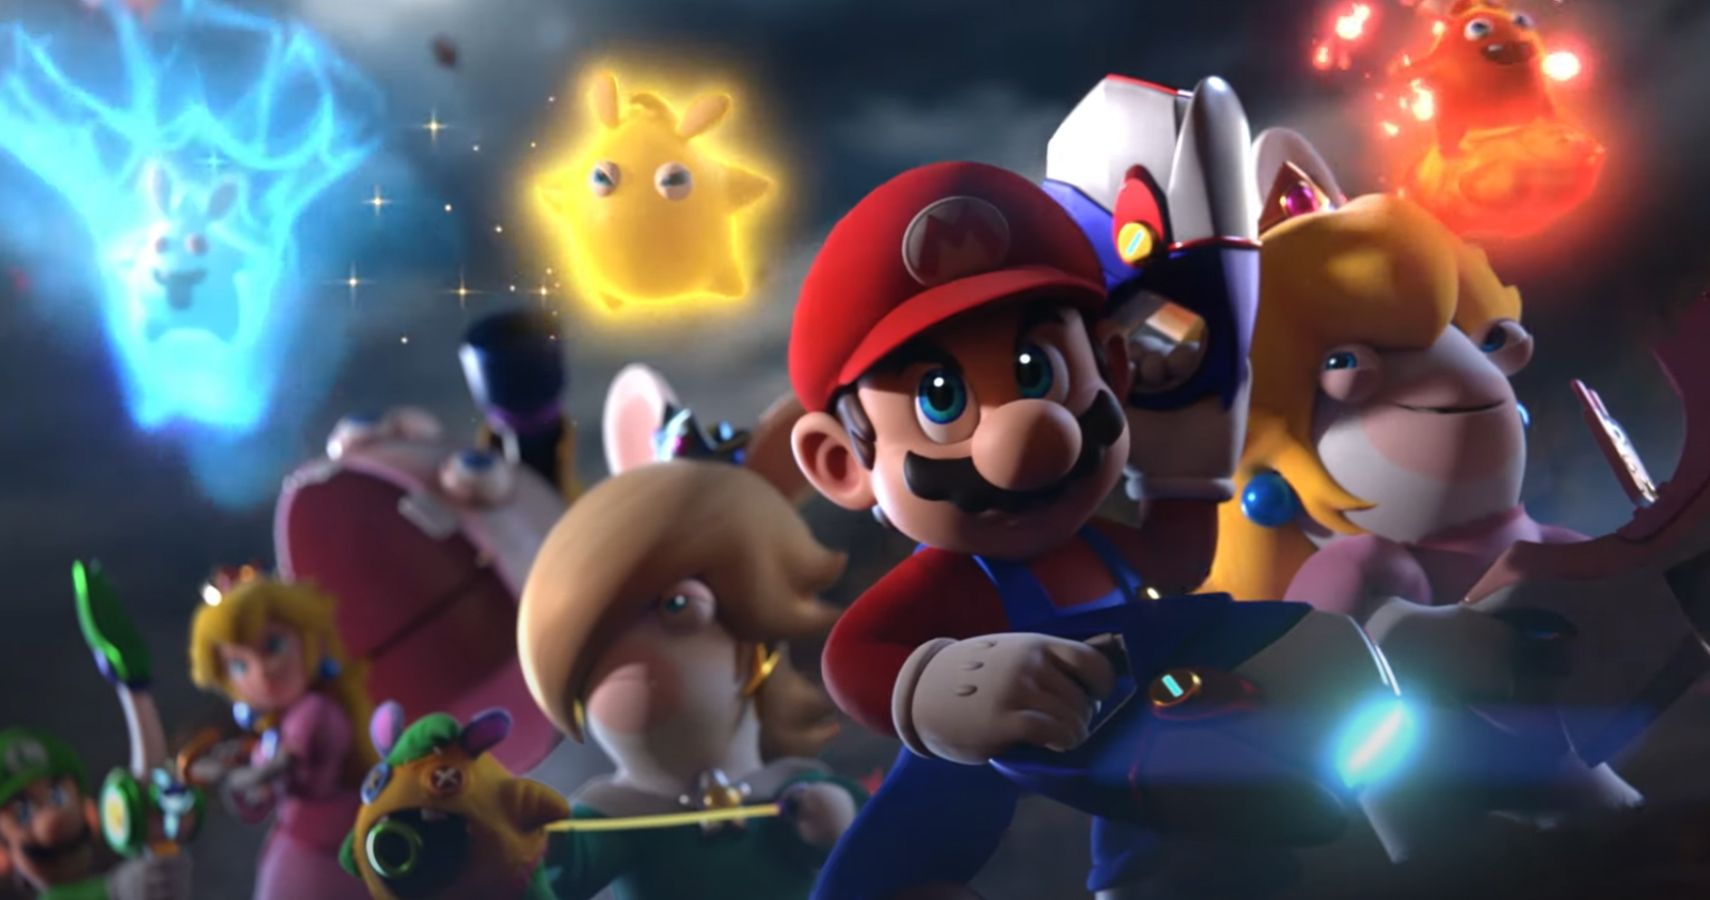 Mario Rabbids 2: Sparks of Hope